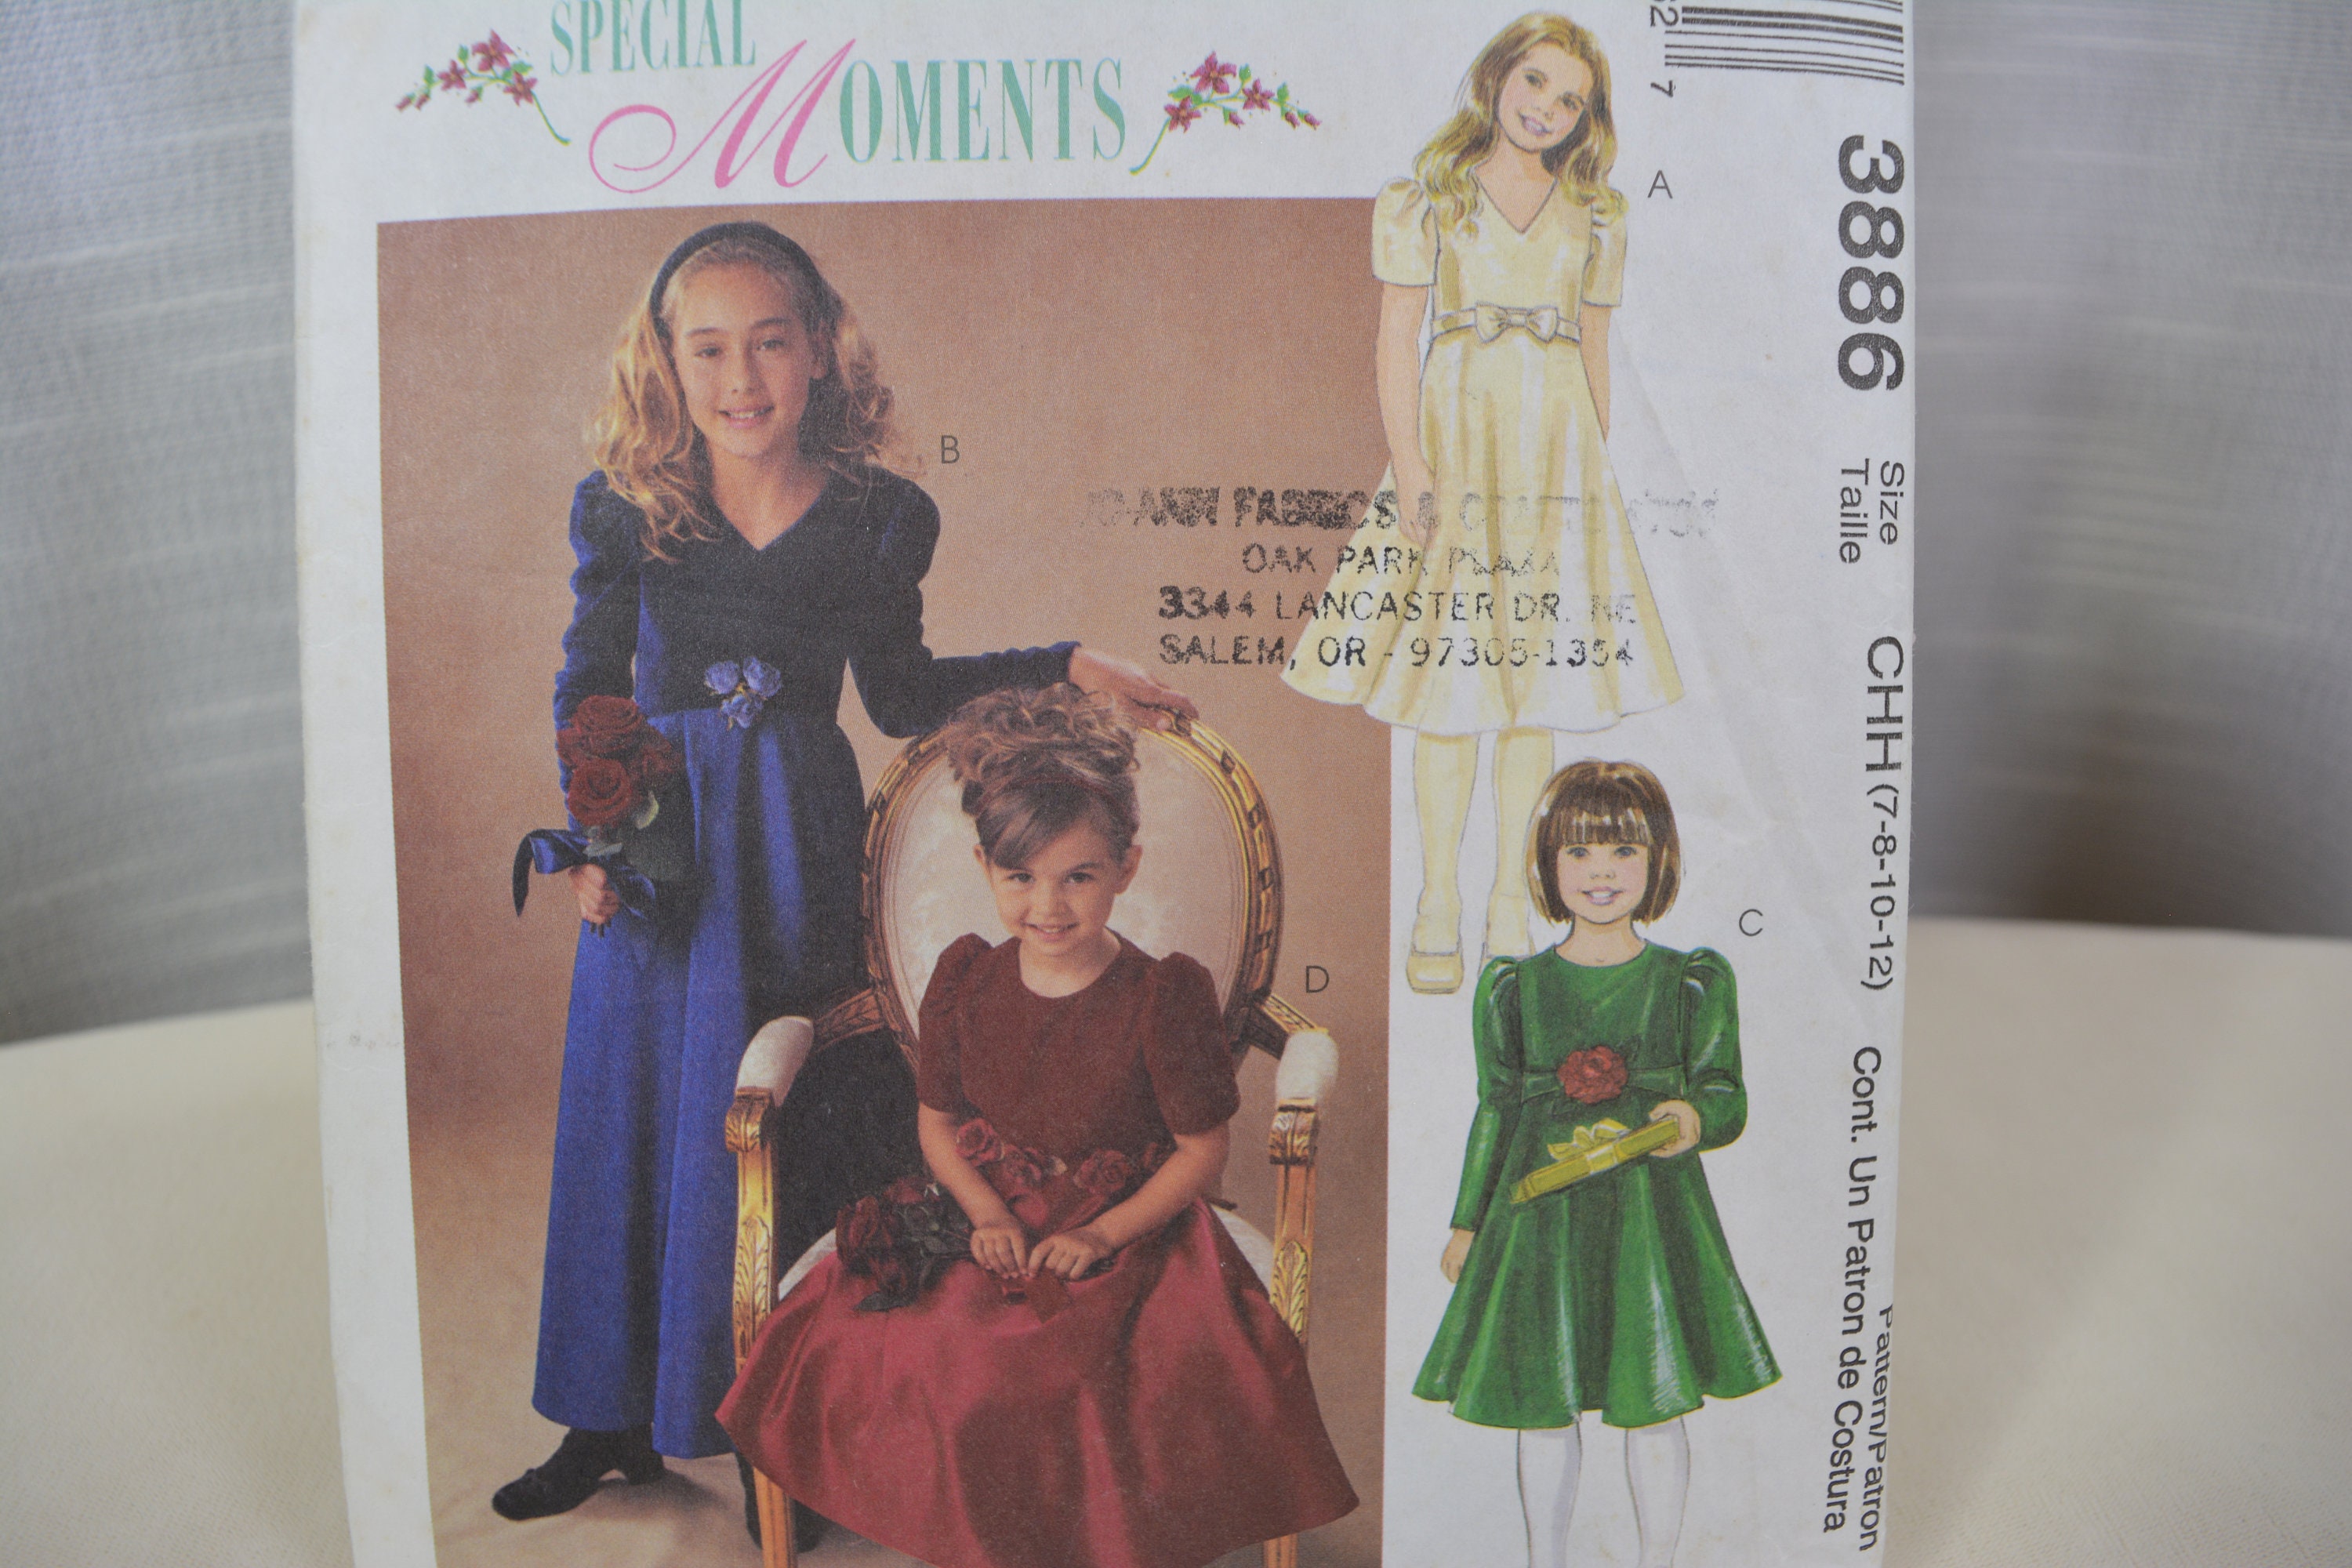 McCalls 3886 Special Moments Girls Flared Skirt Formal Dresses Sewing Pattern 